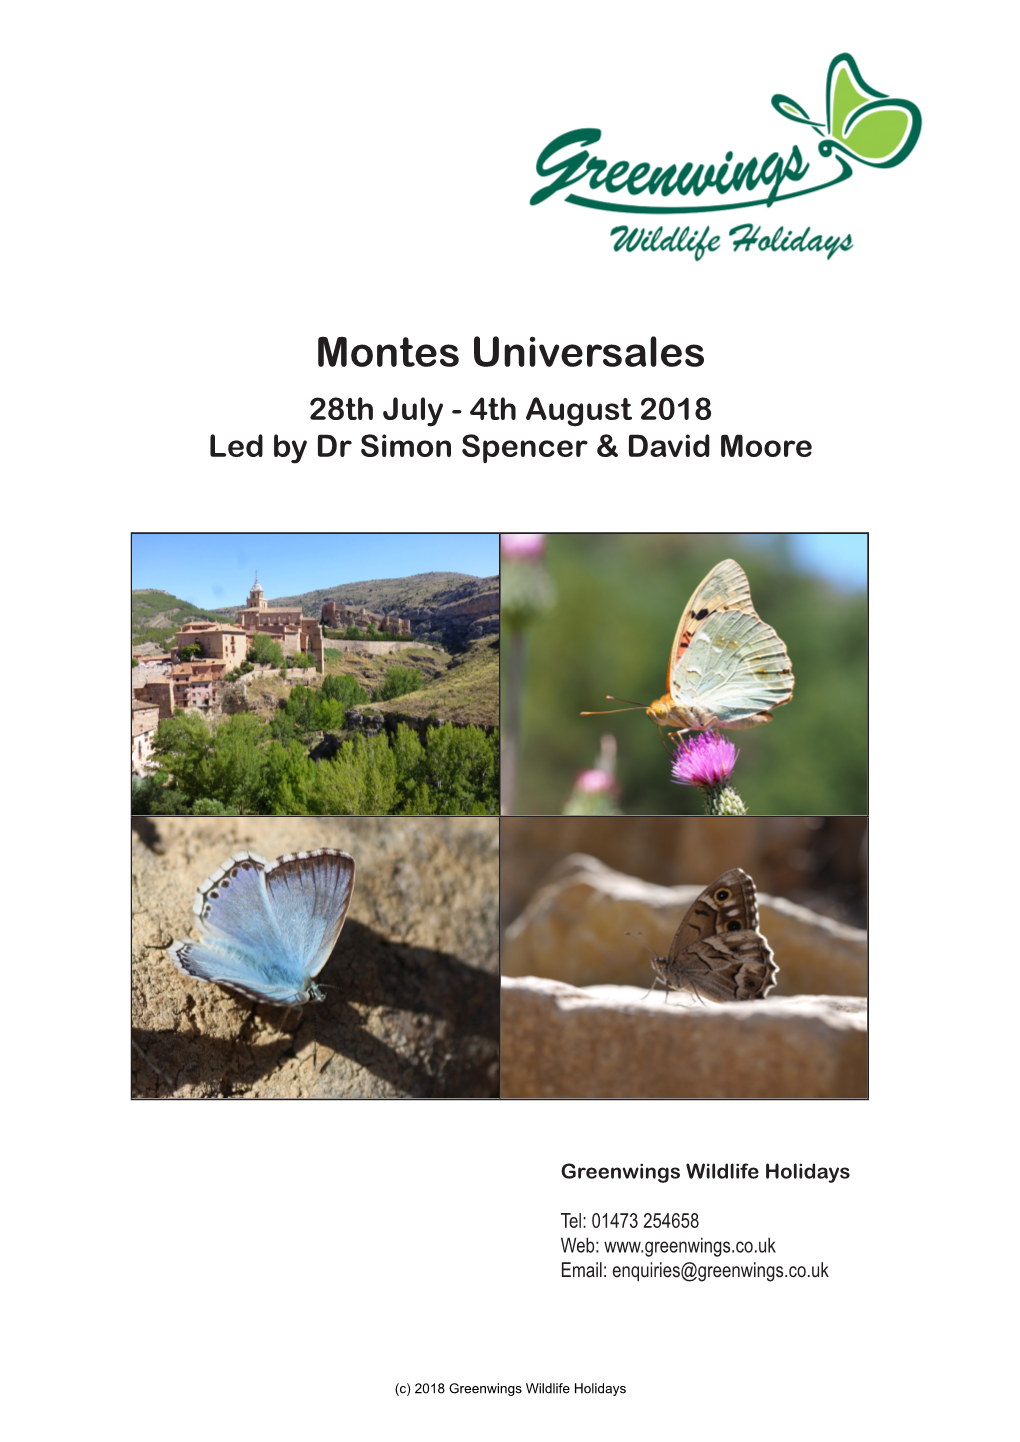 Montes Universales 28Th July - 4Th August 2018 Led by Dr Simon Spencer & David Moore